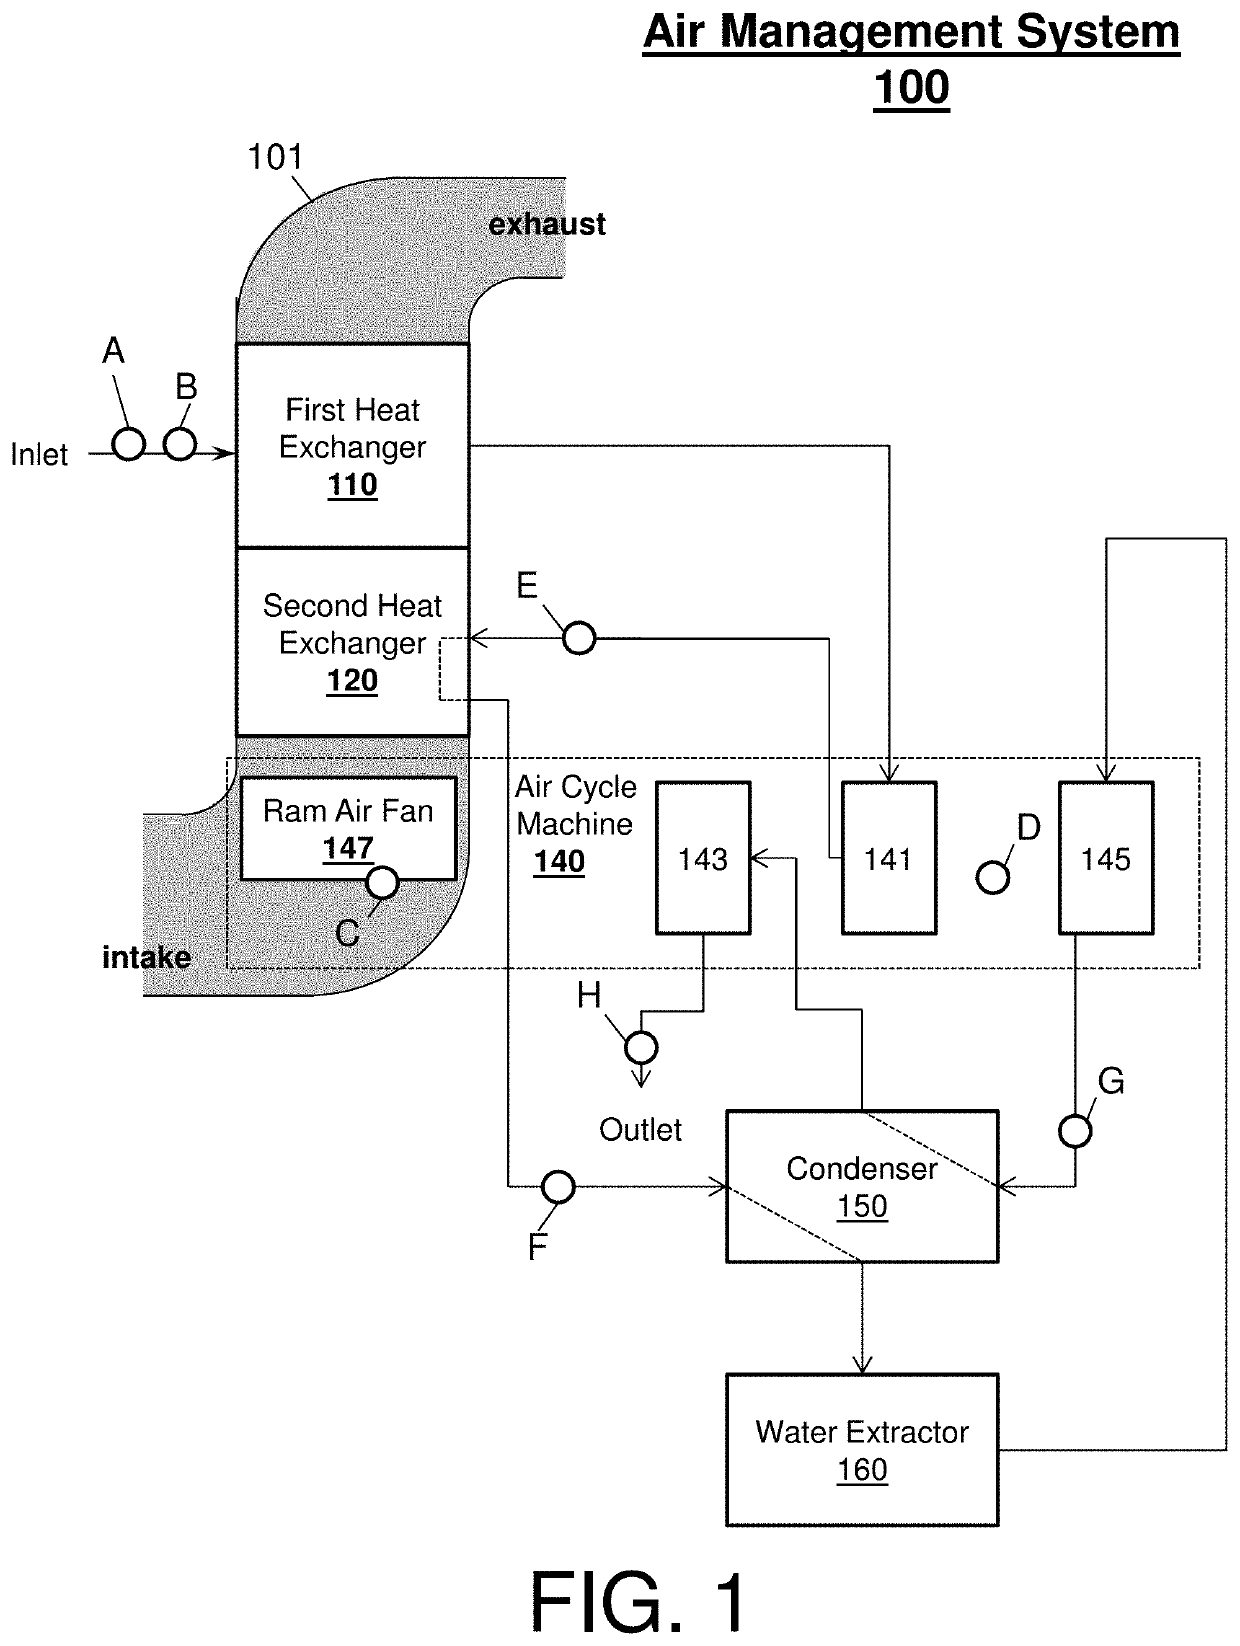 Optimal sensor selection and fusion for heat exchanger fouling diagnosis in aerospace systems